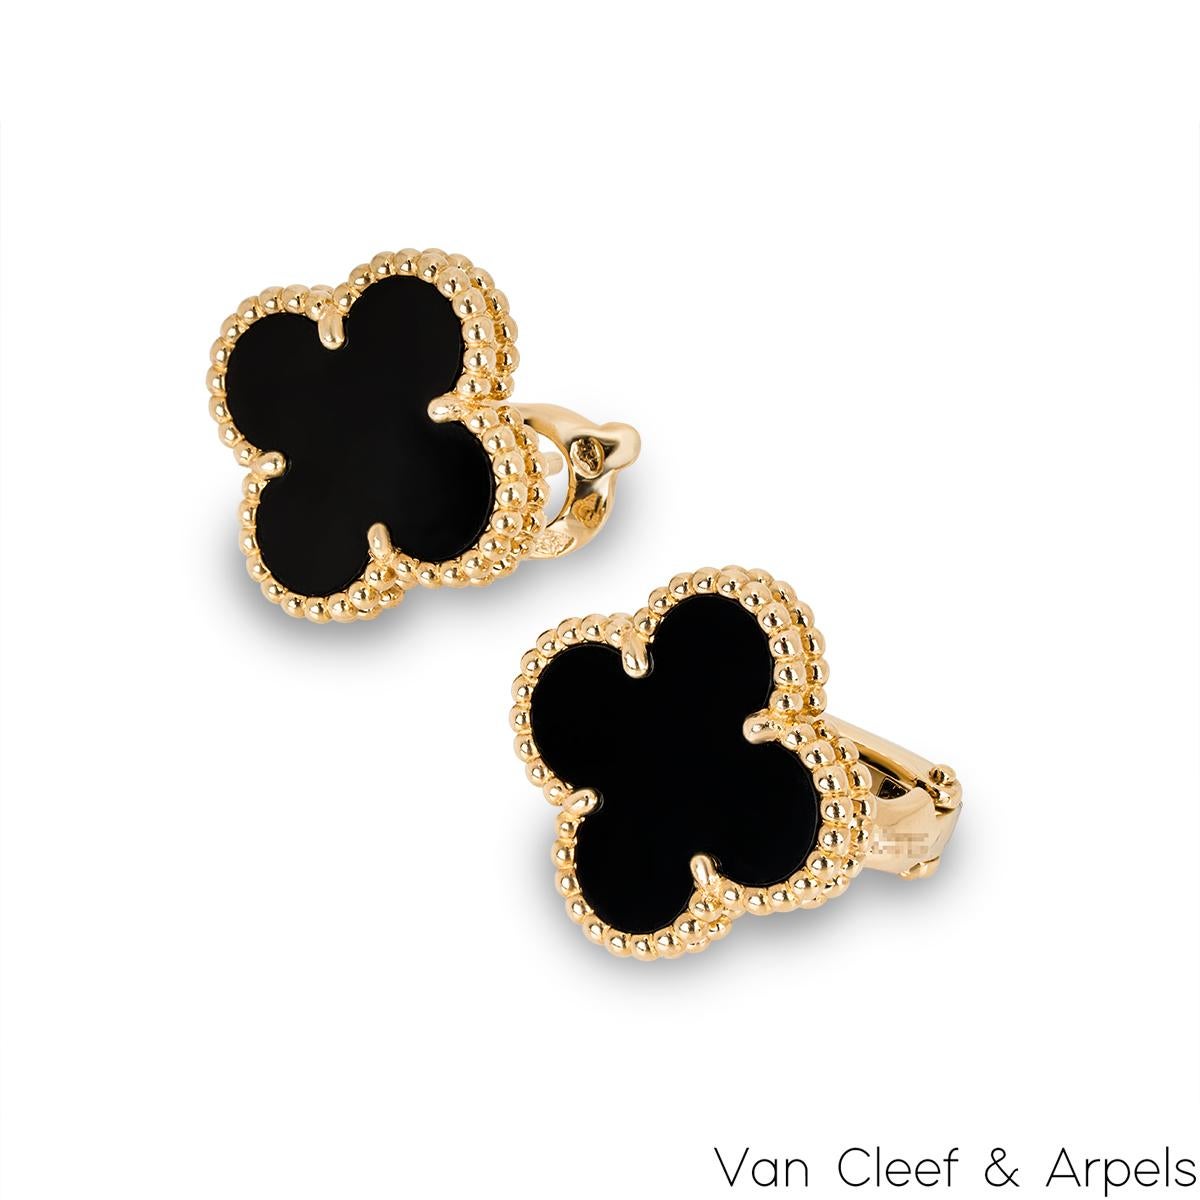 A beautiful pair of 18k yellow gold onyx Van Cleef & Arpels earrings from the Vintage Alhambra collection. The earrings feature the iconic 4-leaf clover motif, with an onyx inlay set to the centre, complemented by a beaded edge. The 1.5cm wide